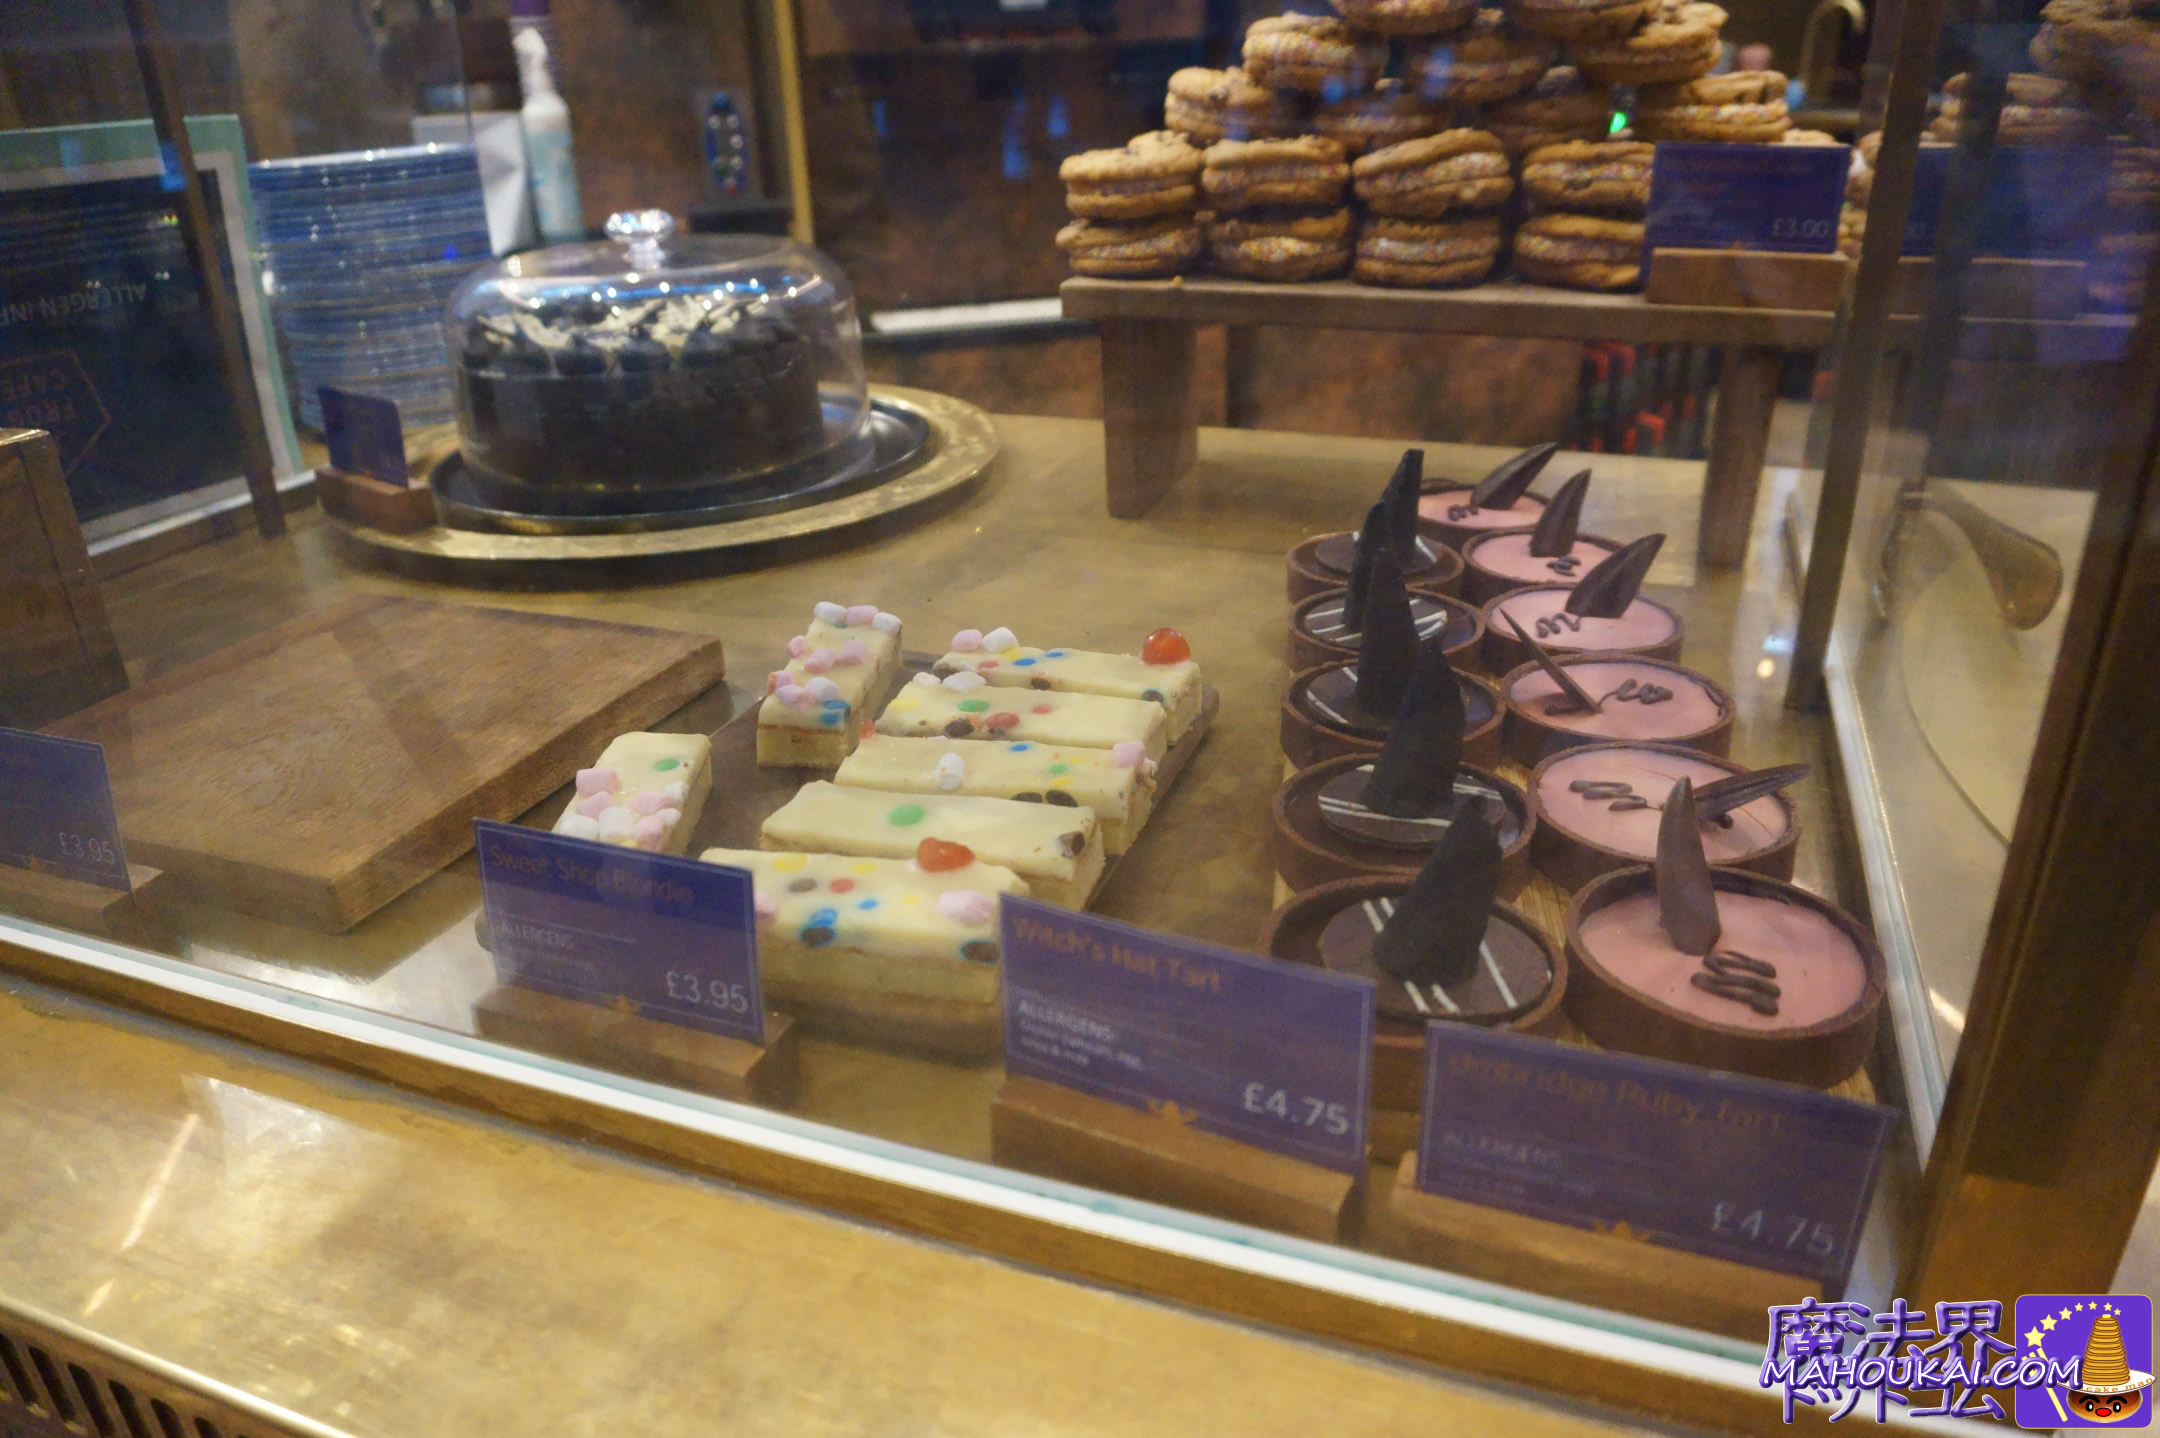 Sweet Shop Blondie £3.95 Witch's Hat Tart £4.75 THE CHOCOLATE FROG CAFE Frog Chocolate Cafe Harry Potter Studio Tour London